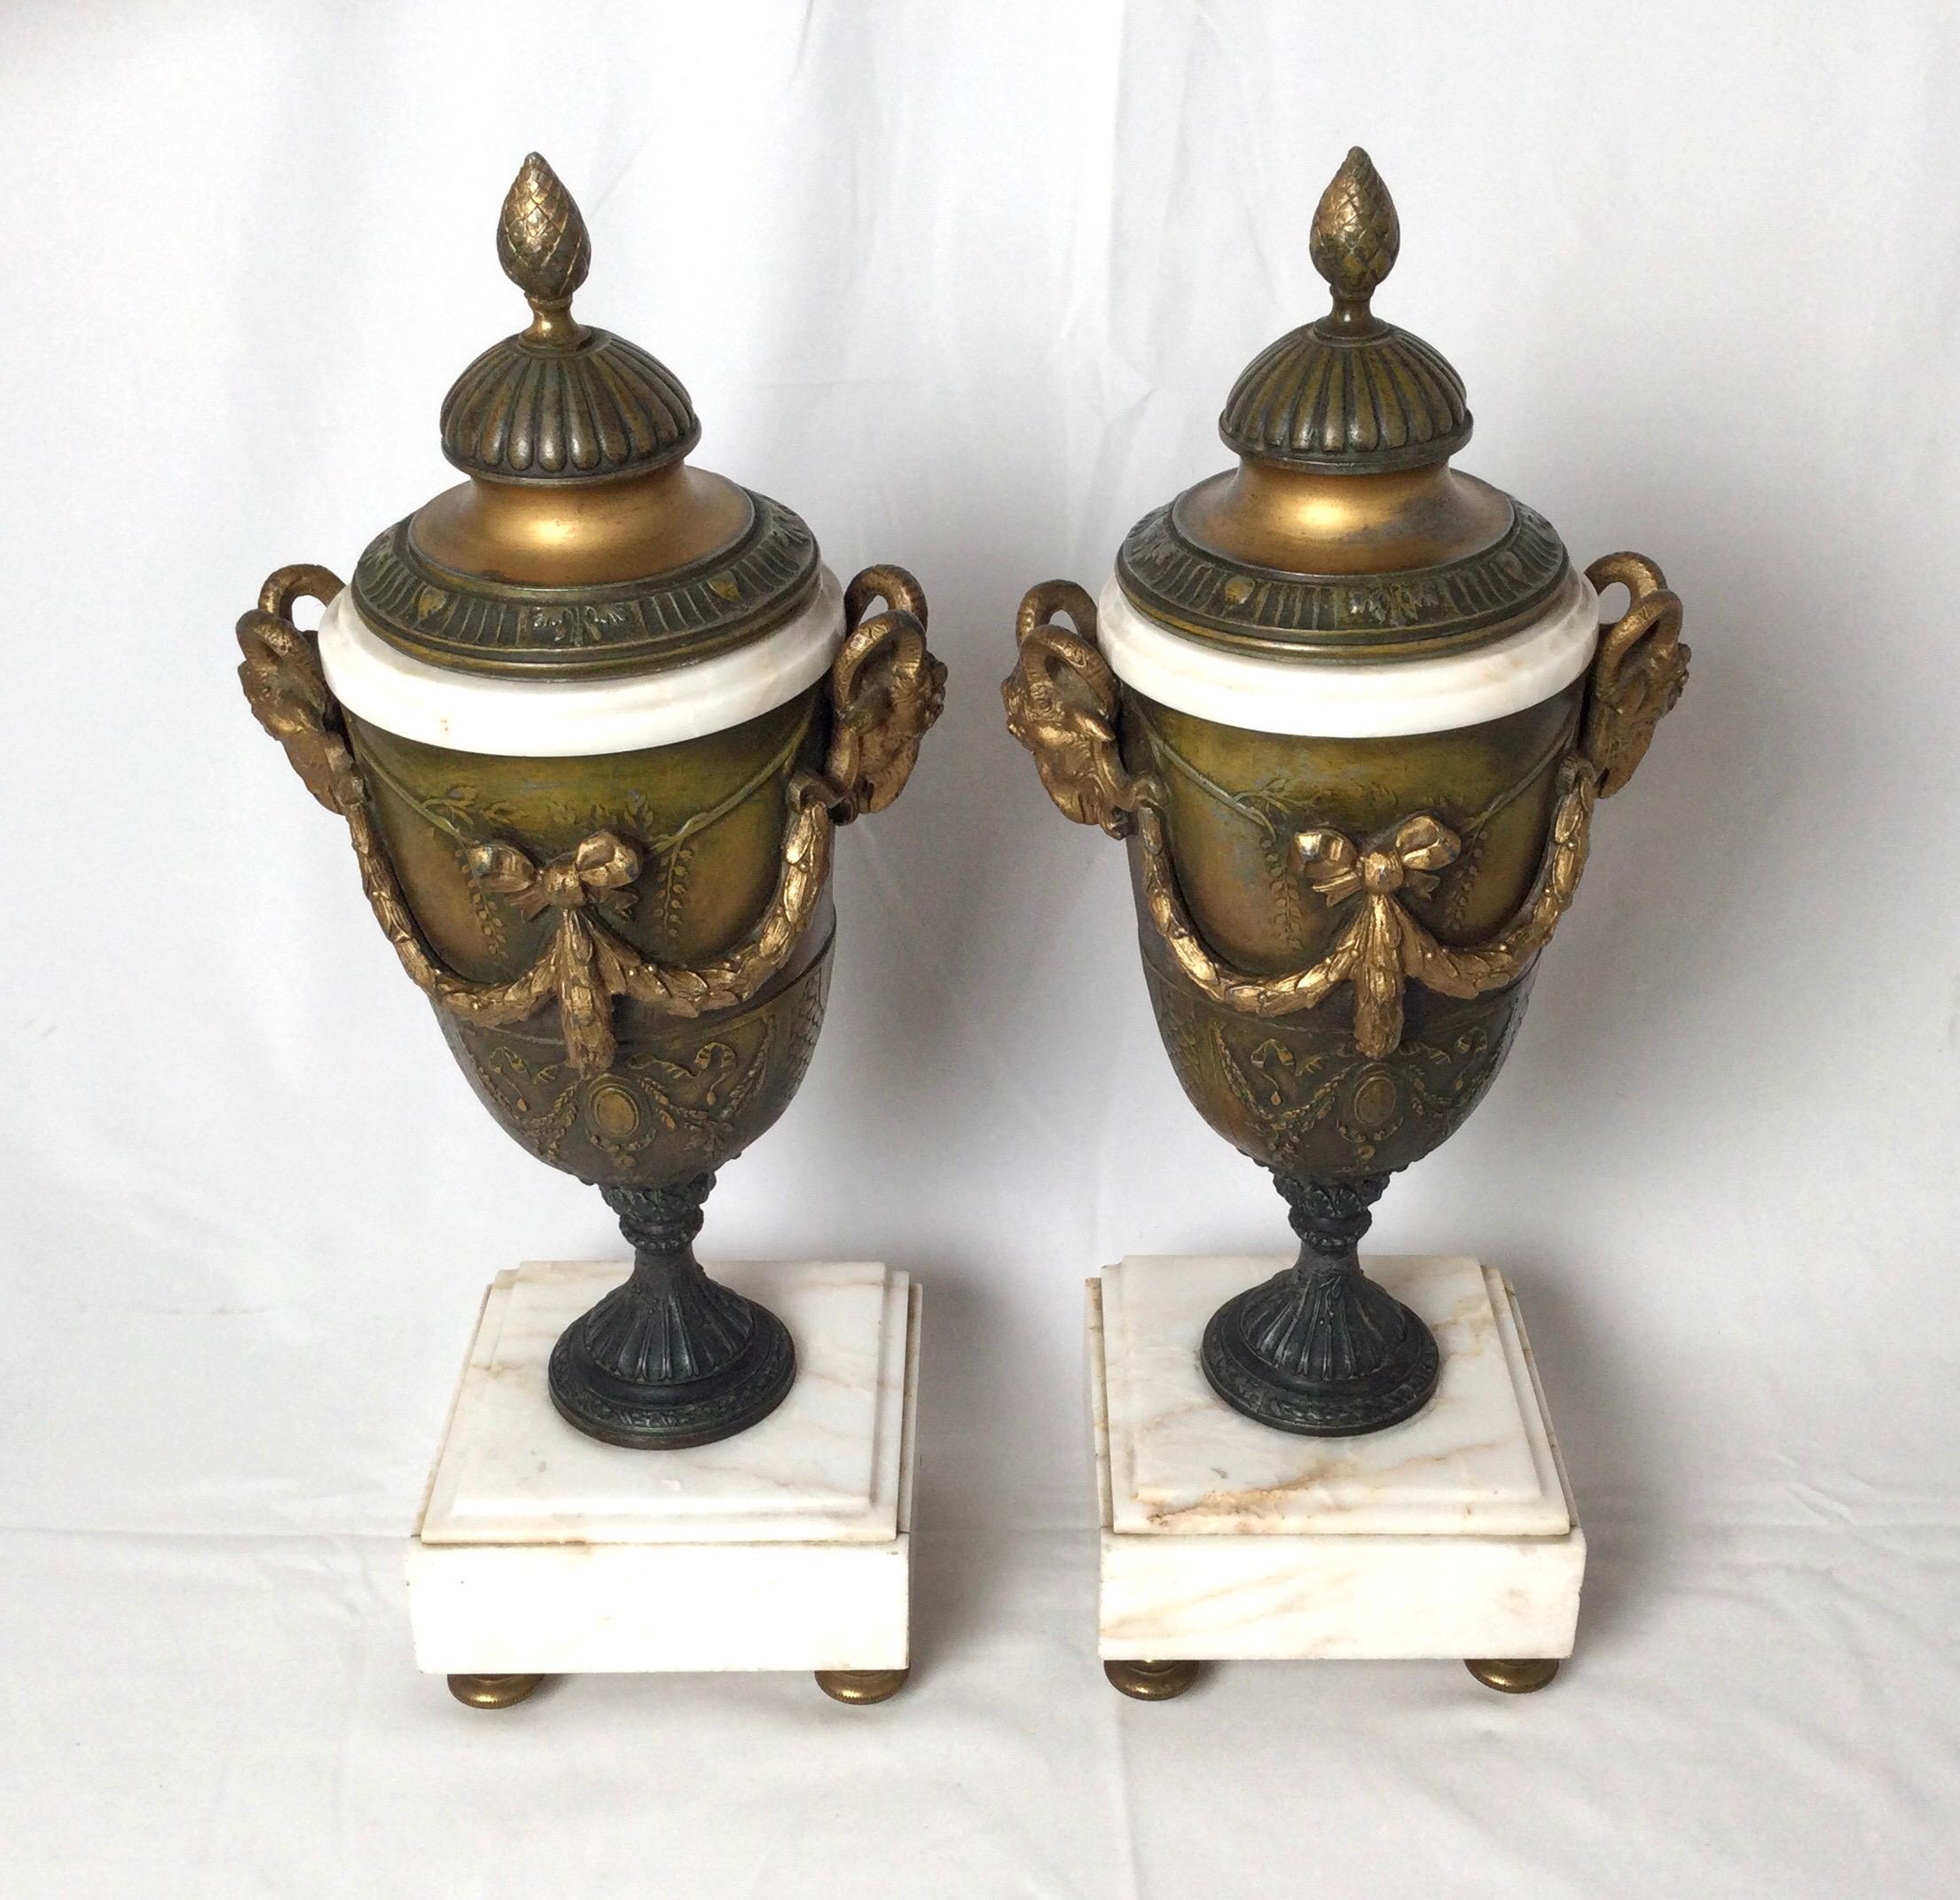 Pair of French style marble and patinated metal garniture urns with ram heads.
Late 19th century, with high relief decorations and attached lid.
Dimensions: 15